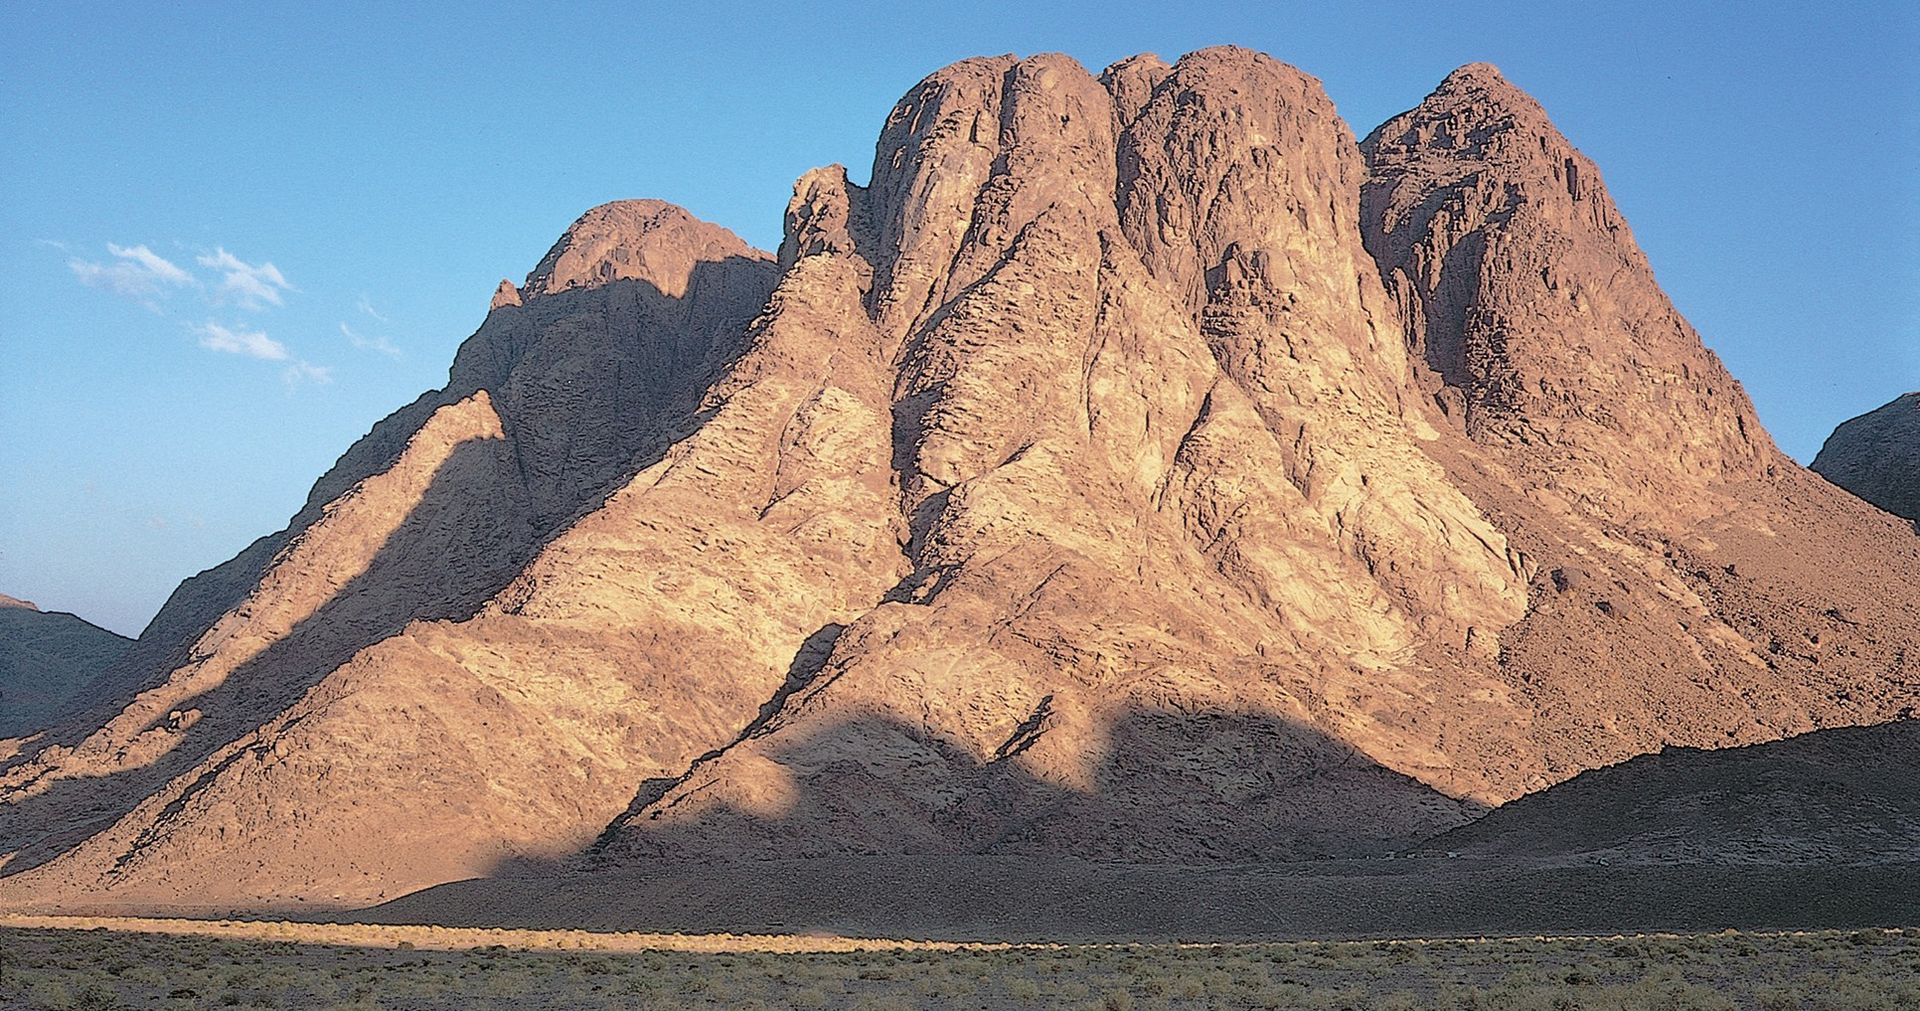 Morning light on the traditional site of Mount Sinai in Egypt.